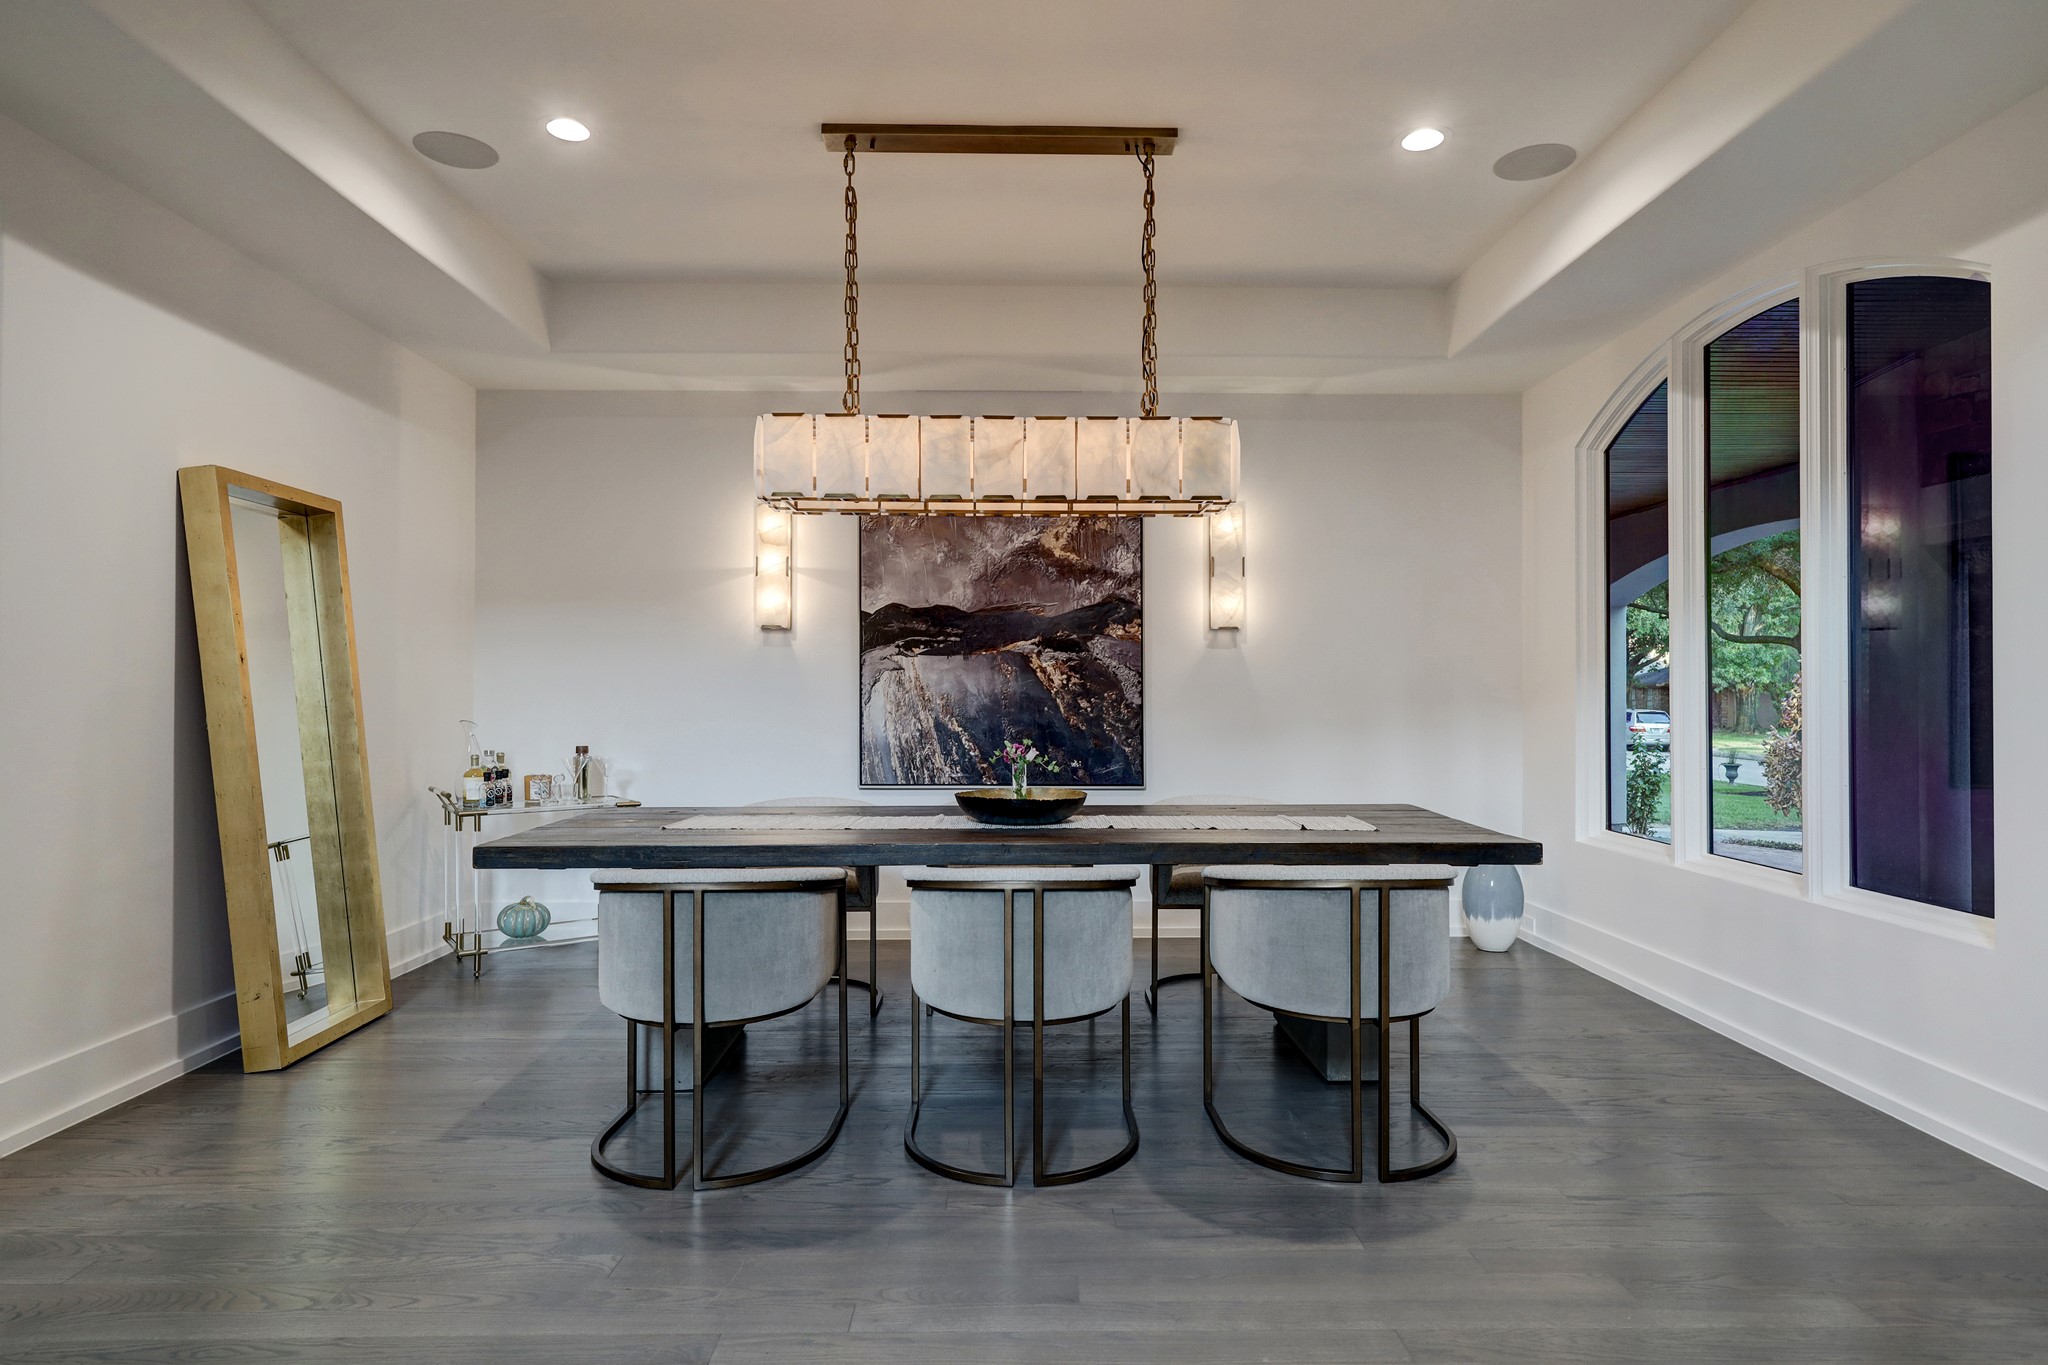 The formal dining room features Restoration Hardware chandelier and wall scones. Restoration Hardware Chandeliers and Lighting Fixtures are throughout the home.